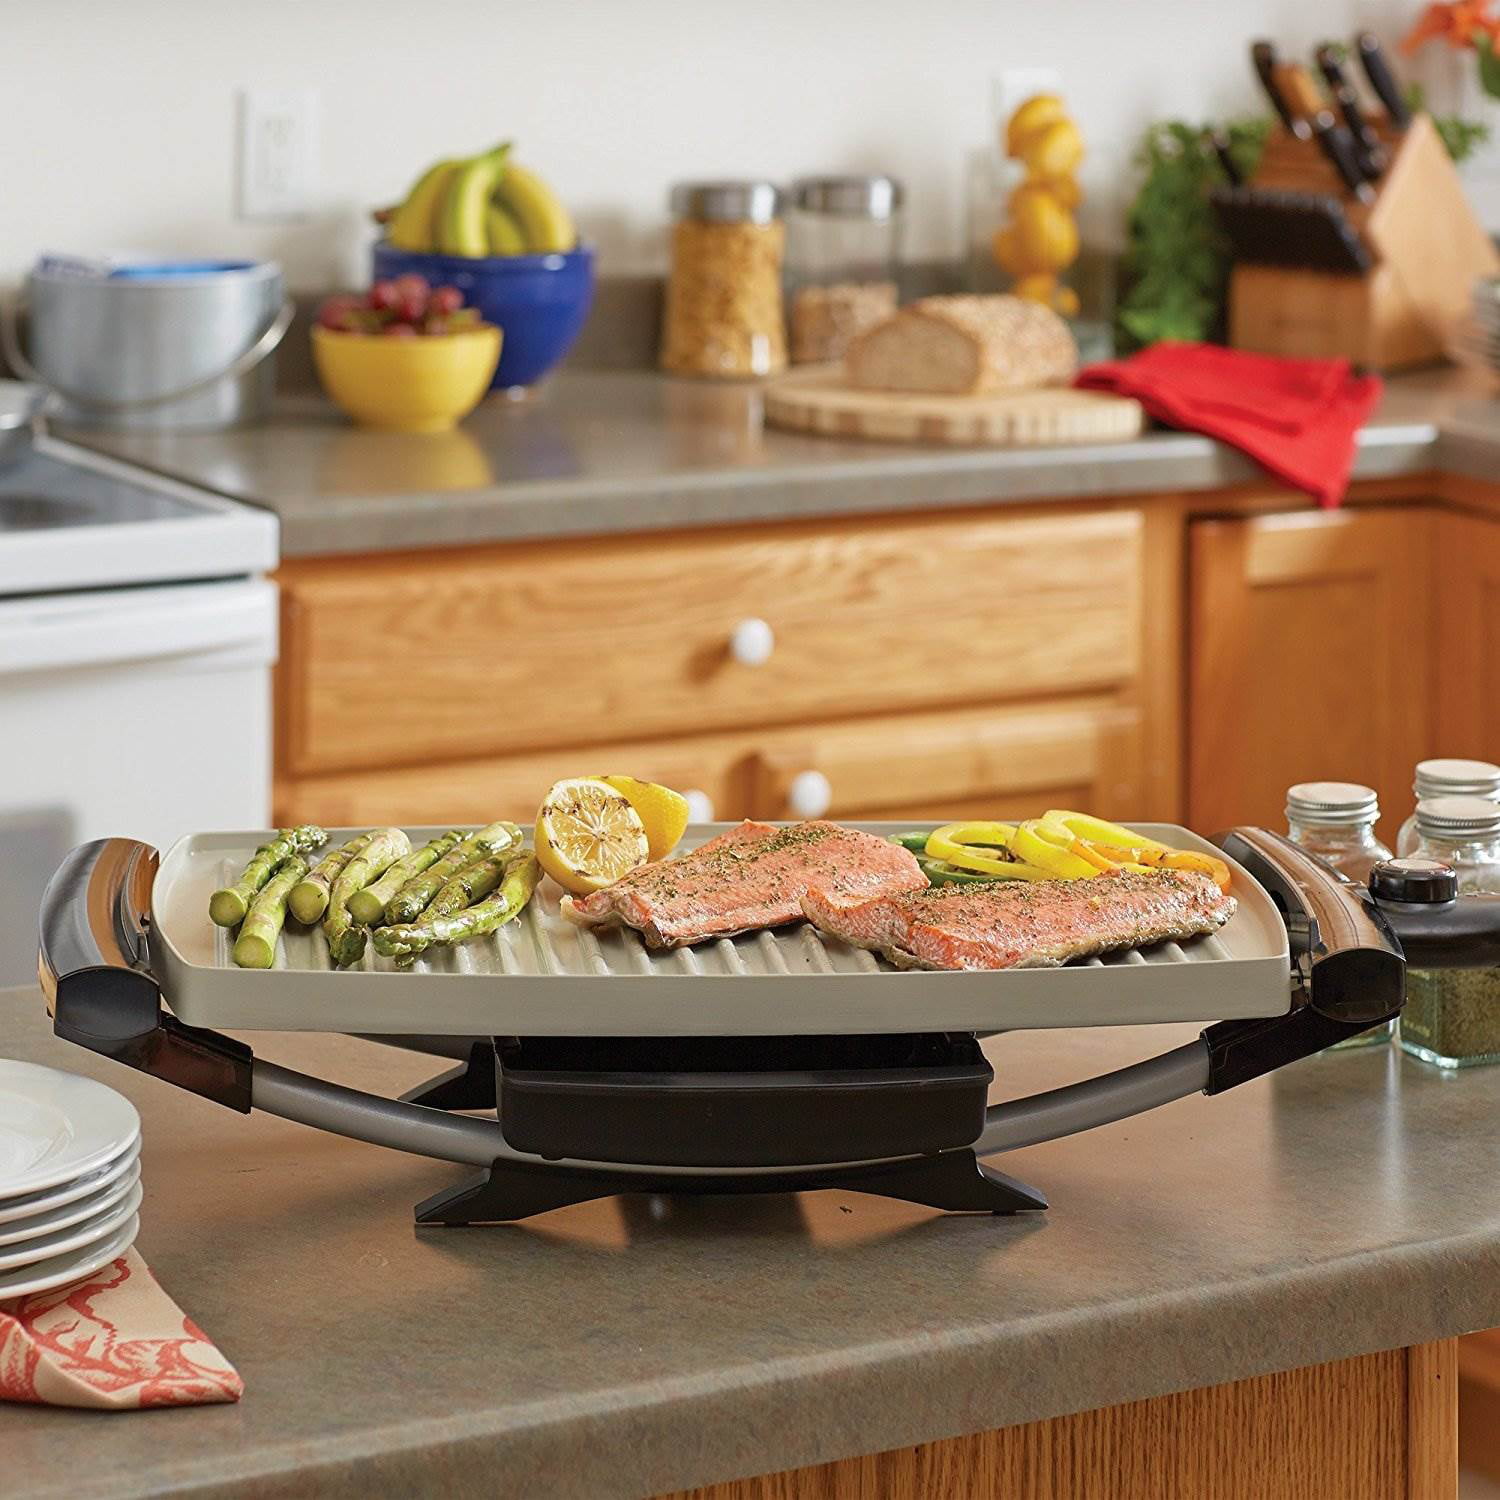 George Foreman Rapid Grill Serie 6.41-in L x 12.72-in W Non-stick  Residential in the Indoor Grills department at